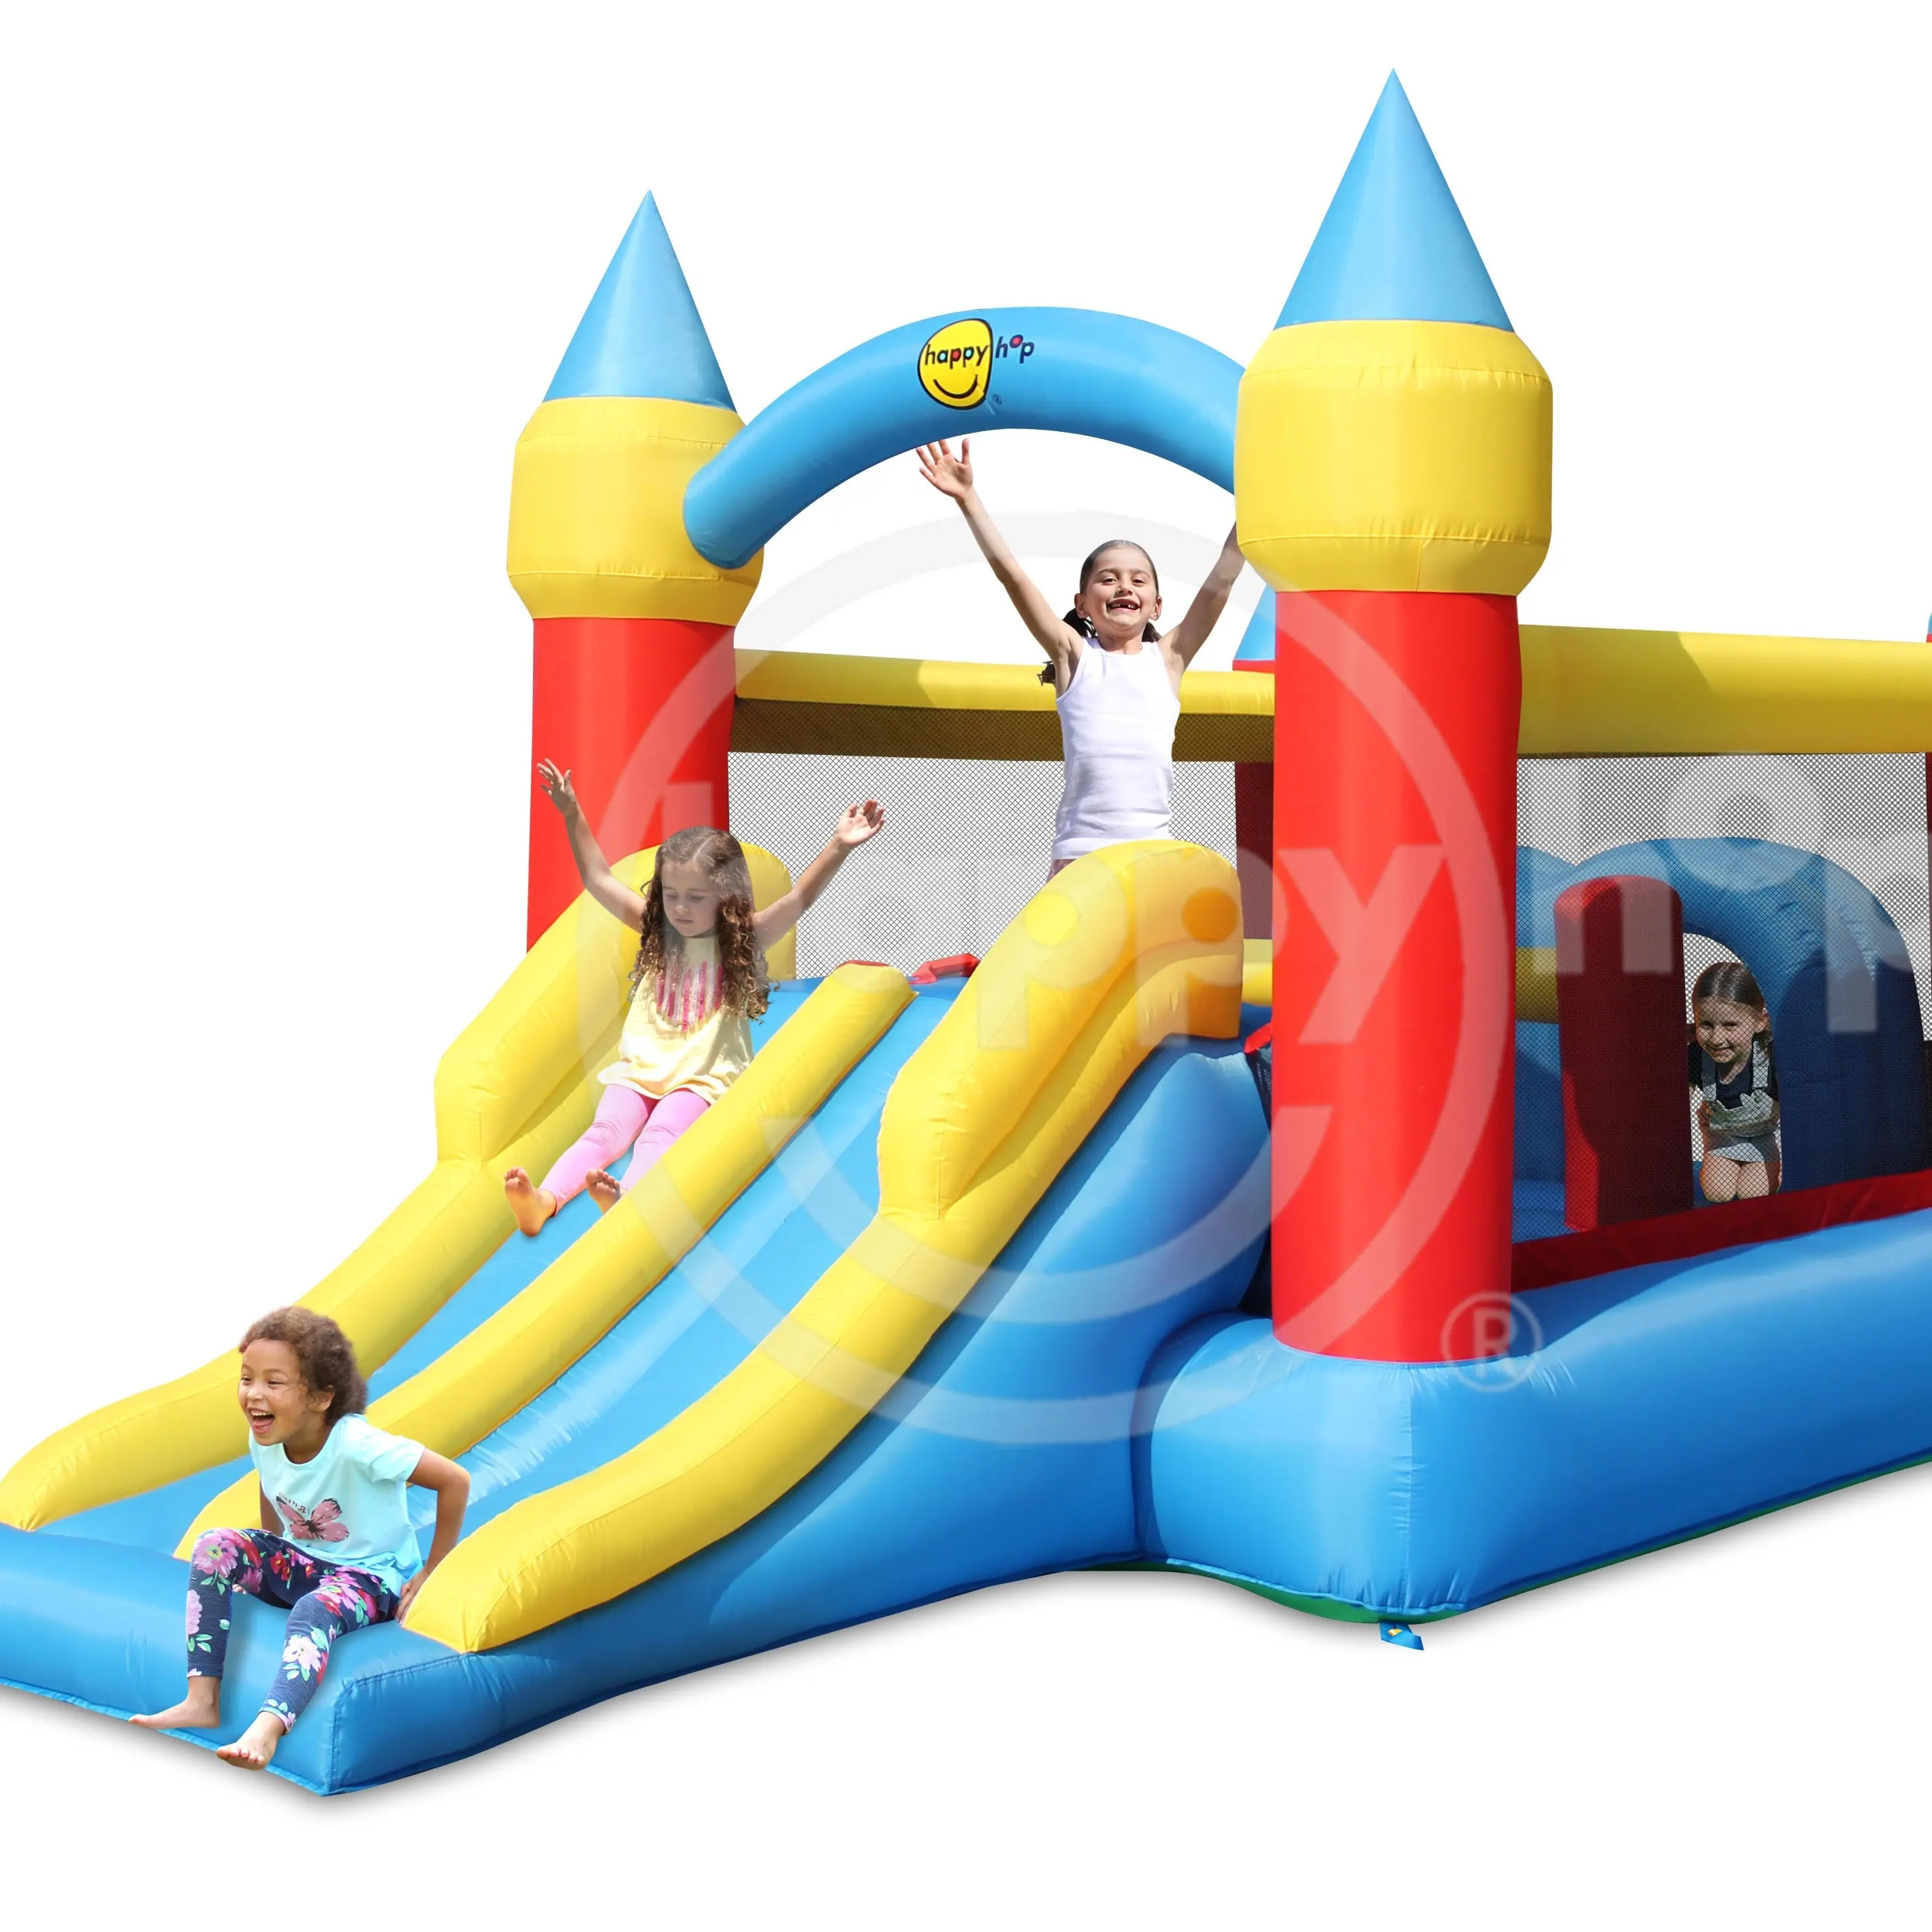 Kids Inflatable Aeroplane Bouncy Castle 9237 for outdoor home use